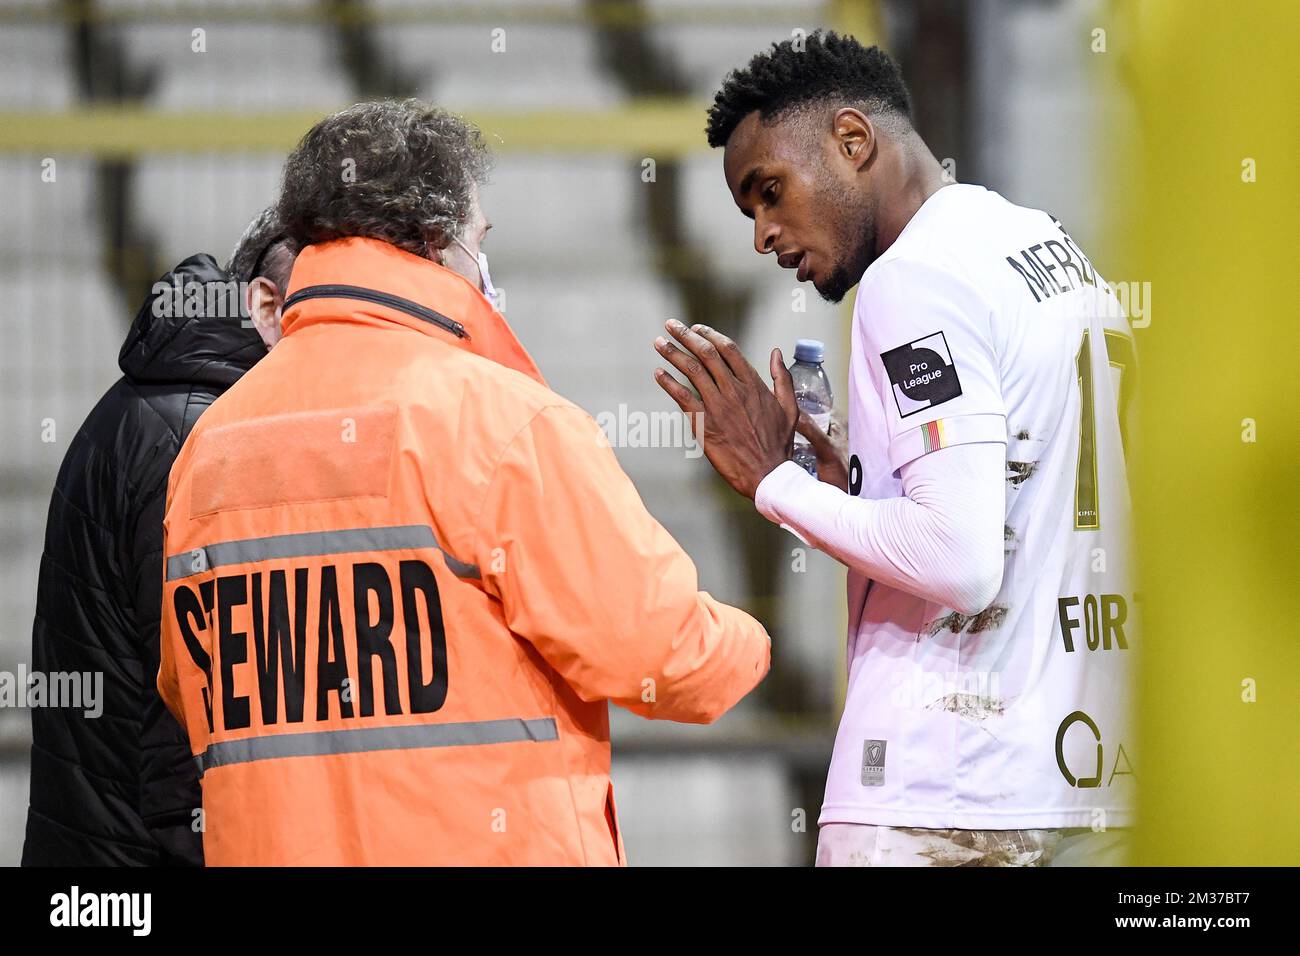 Oostende's Steven Fortes leaves the field after receiving a red card during a soccer match between Beerschot VA and KV Oostende, Saturday 18 December 2021 in Antwerp, on day 20 of the 2021-2022 'Jupiler Pro League' first division of the Belgian championship. BELGA PHOTO TOM GOYVAERTS Stock Photo